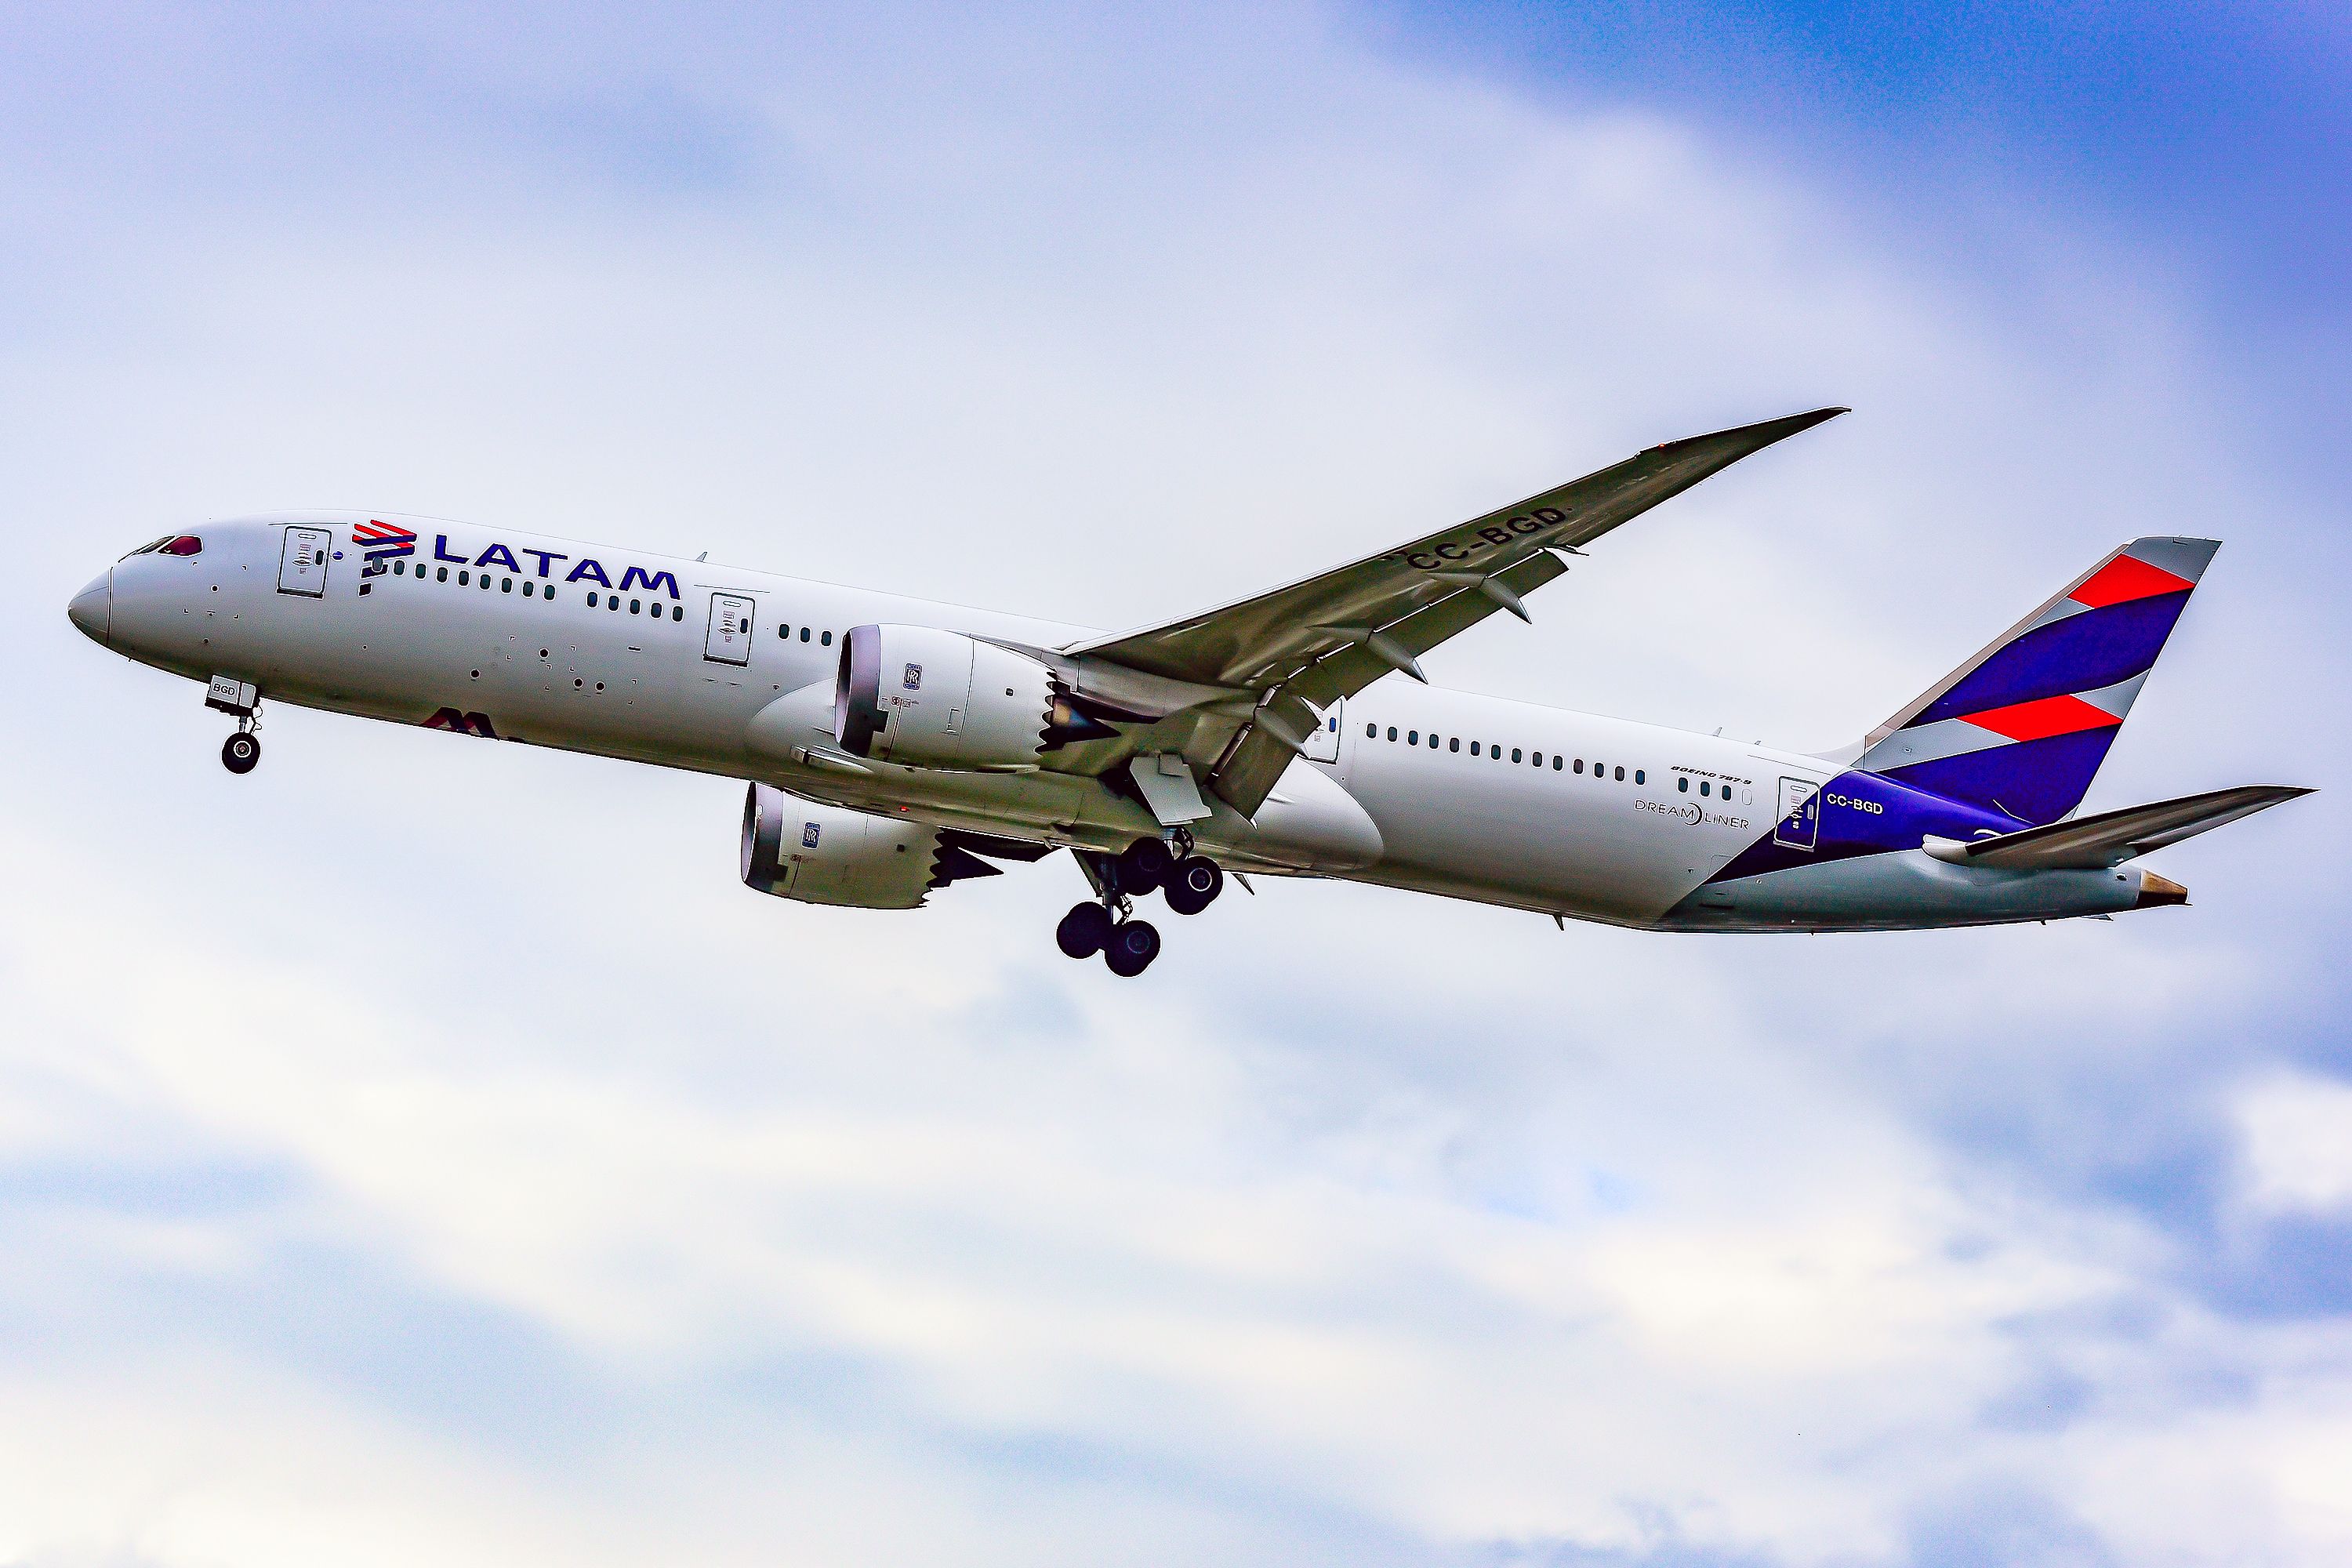 A LATAM Airlines Boeing 787-9 aircraft 